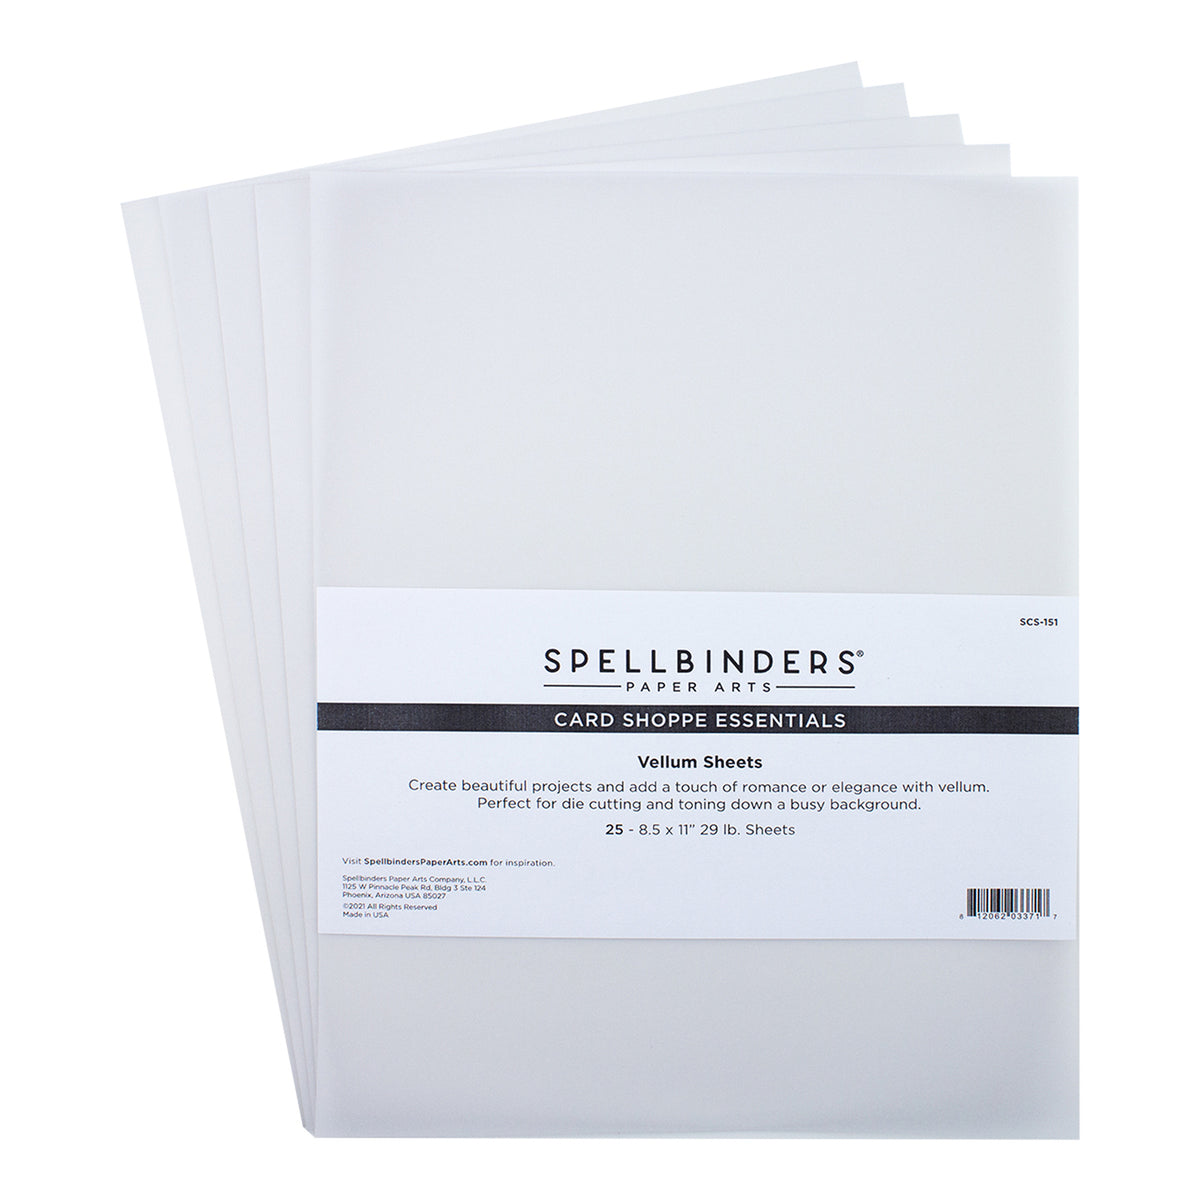 Vellum Sheets from the Card Shoppe Essentials Collection - 25 pk